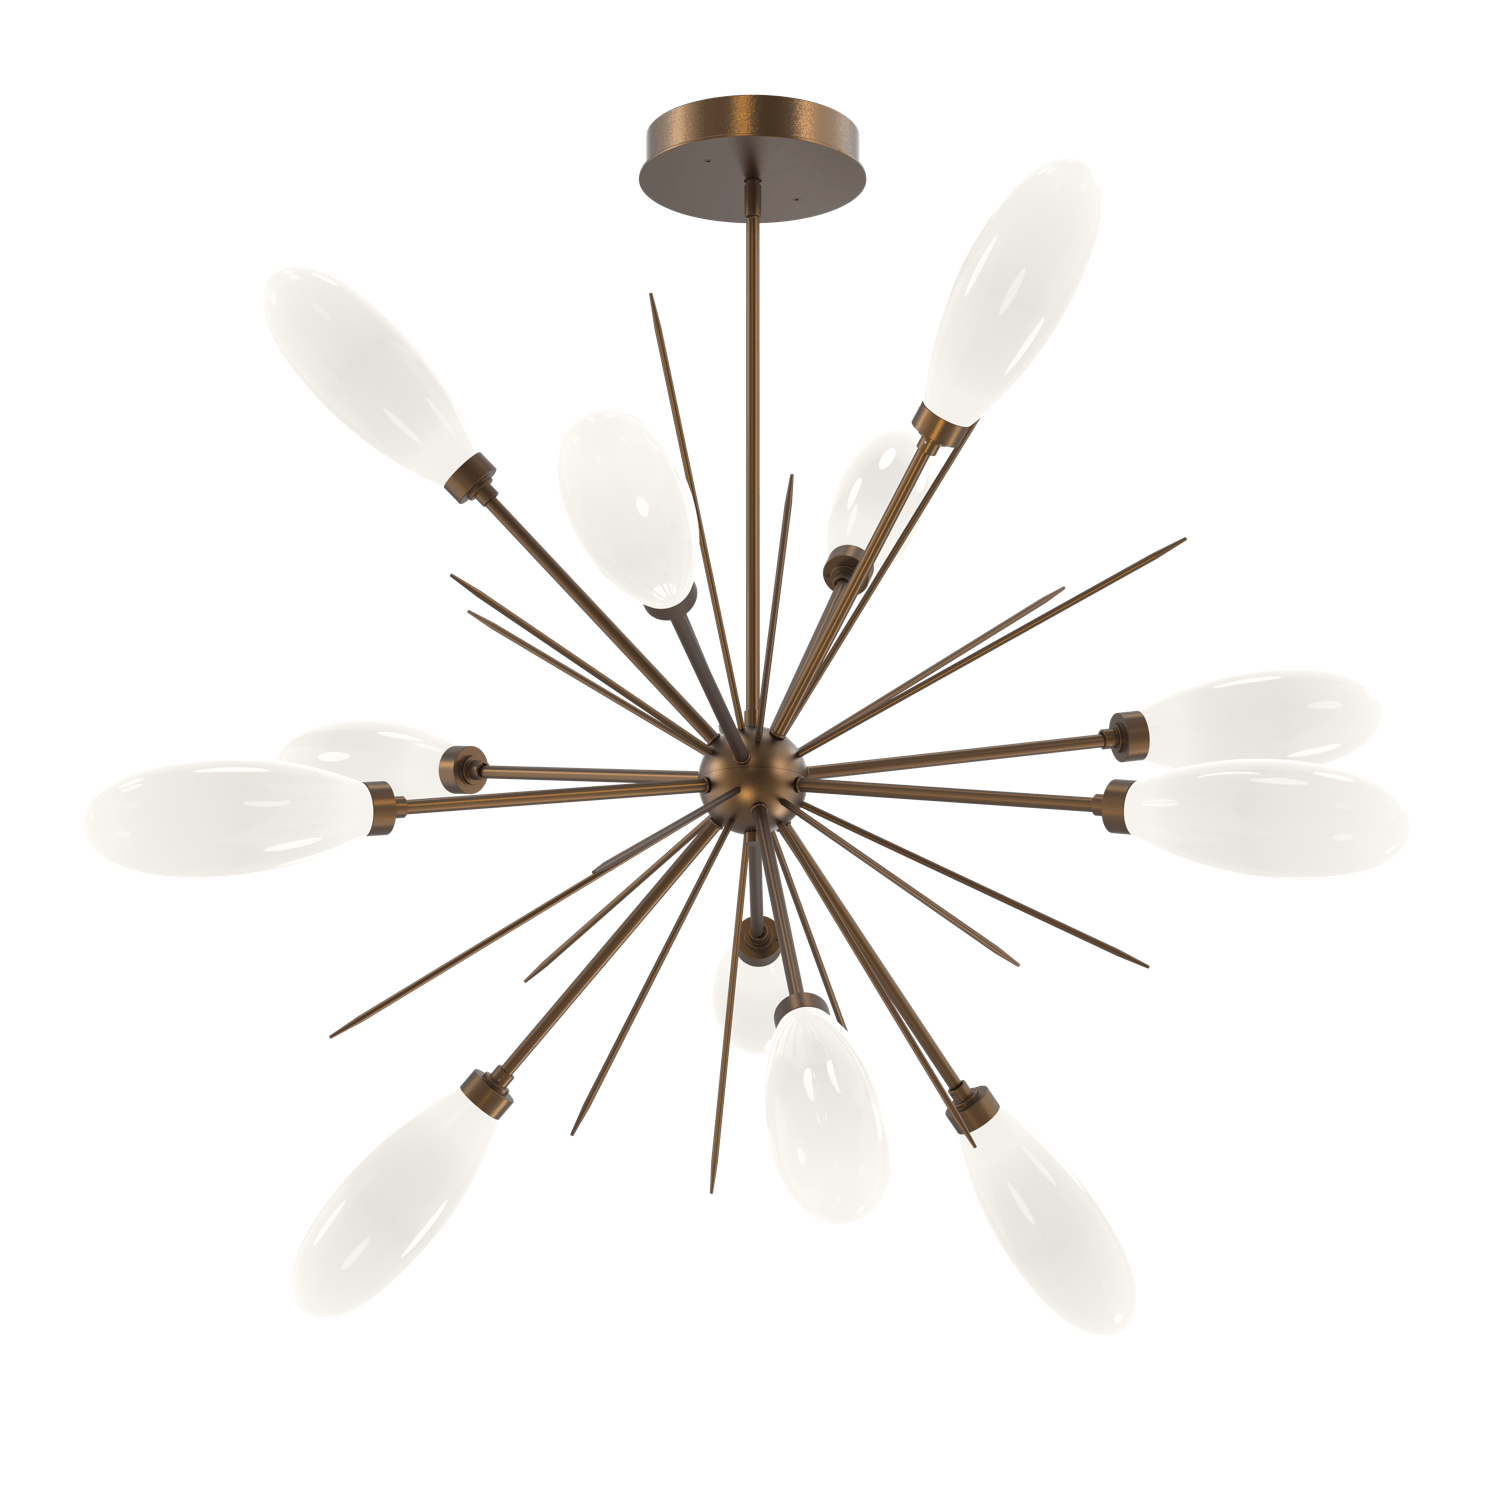 CHB0071-0B-FB-WL-LL-Hammerton-Studio-Fiori-34-inch-starburst-chandelier-with-satin-nickel-finish-and-opal-white-glass-shades-and-LED-lamping